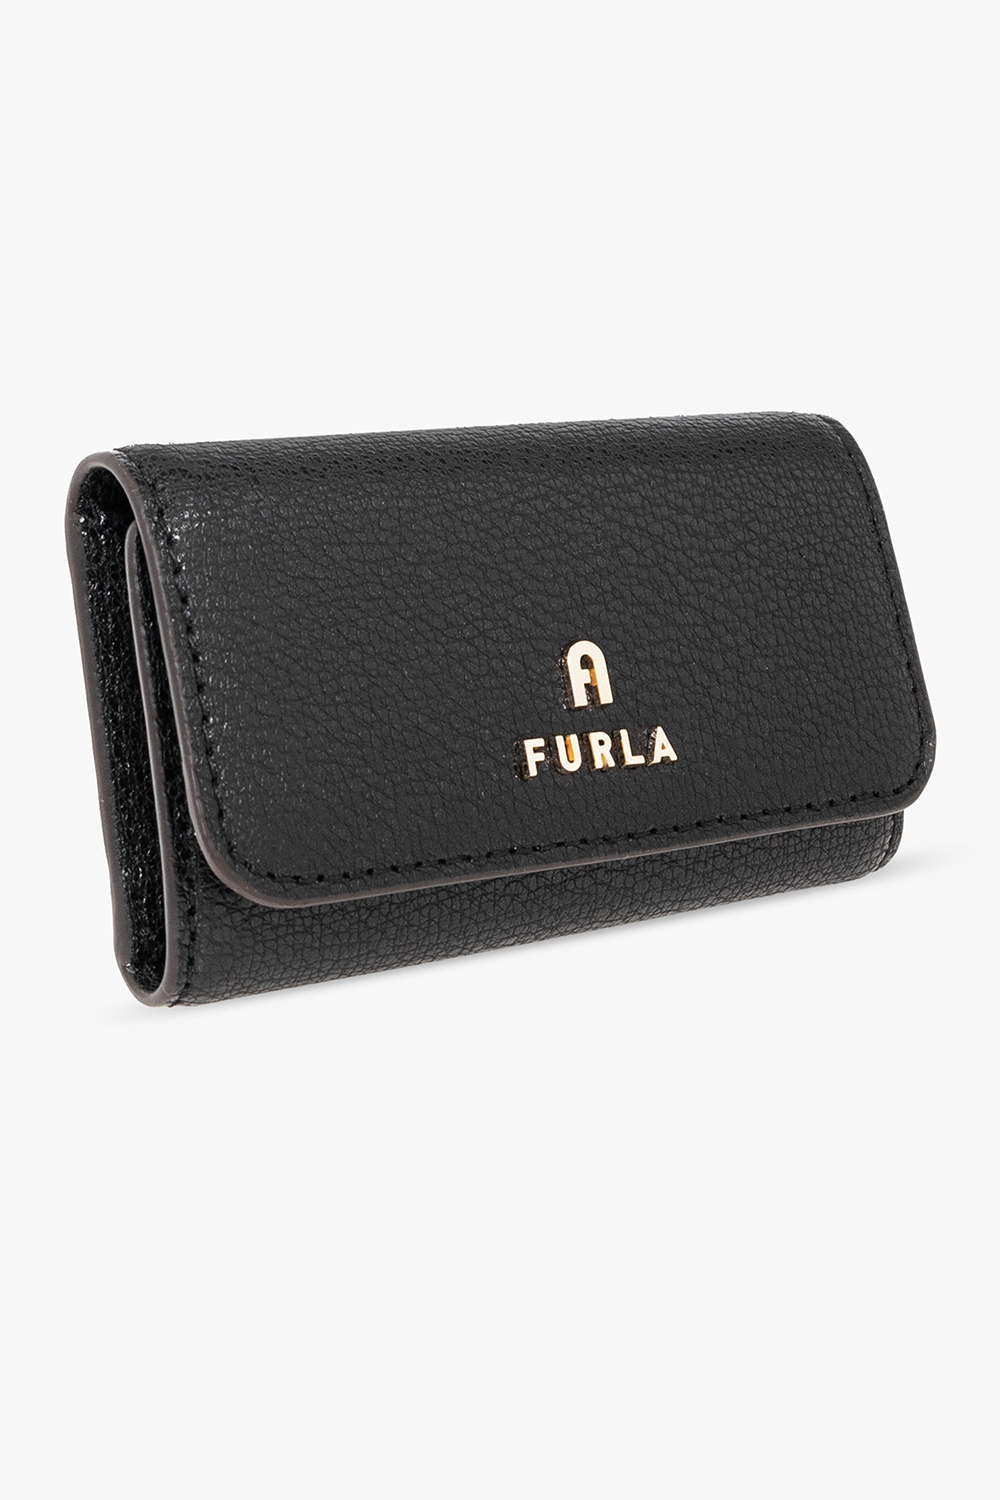 Furla A history of the brand